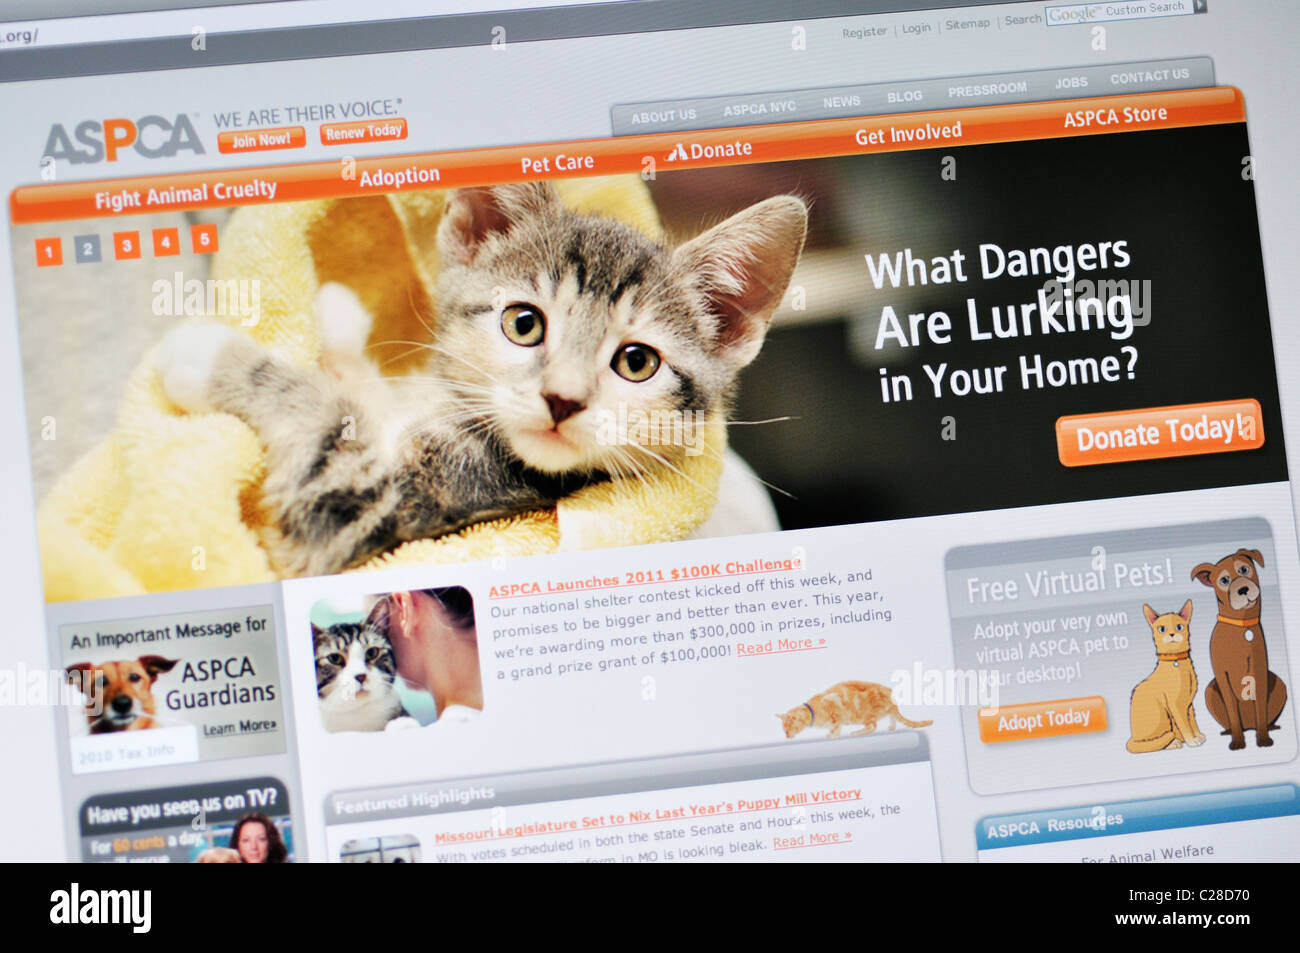 ASPCA website - American Society for the Prevention of Cruelty to Animals  Stock Photo - Alamy